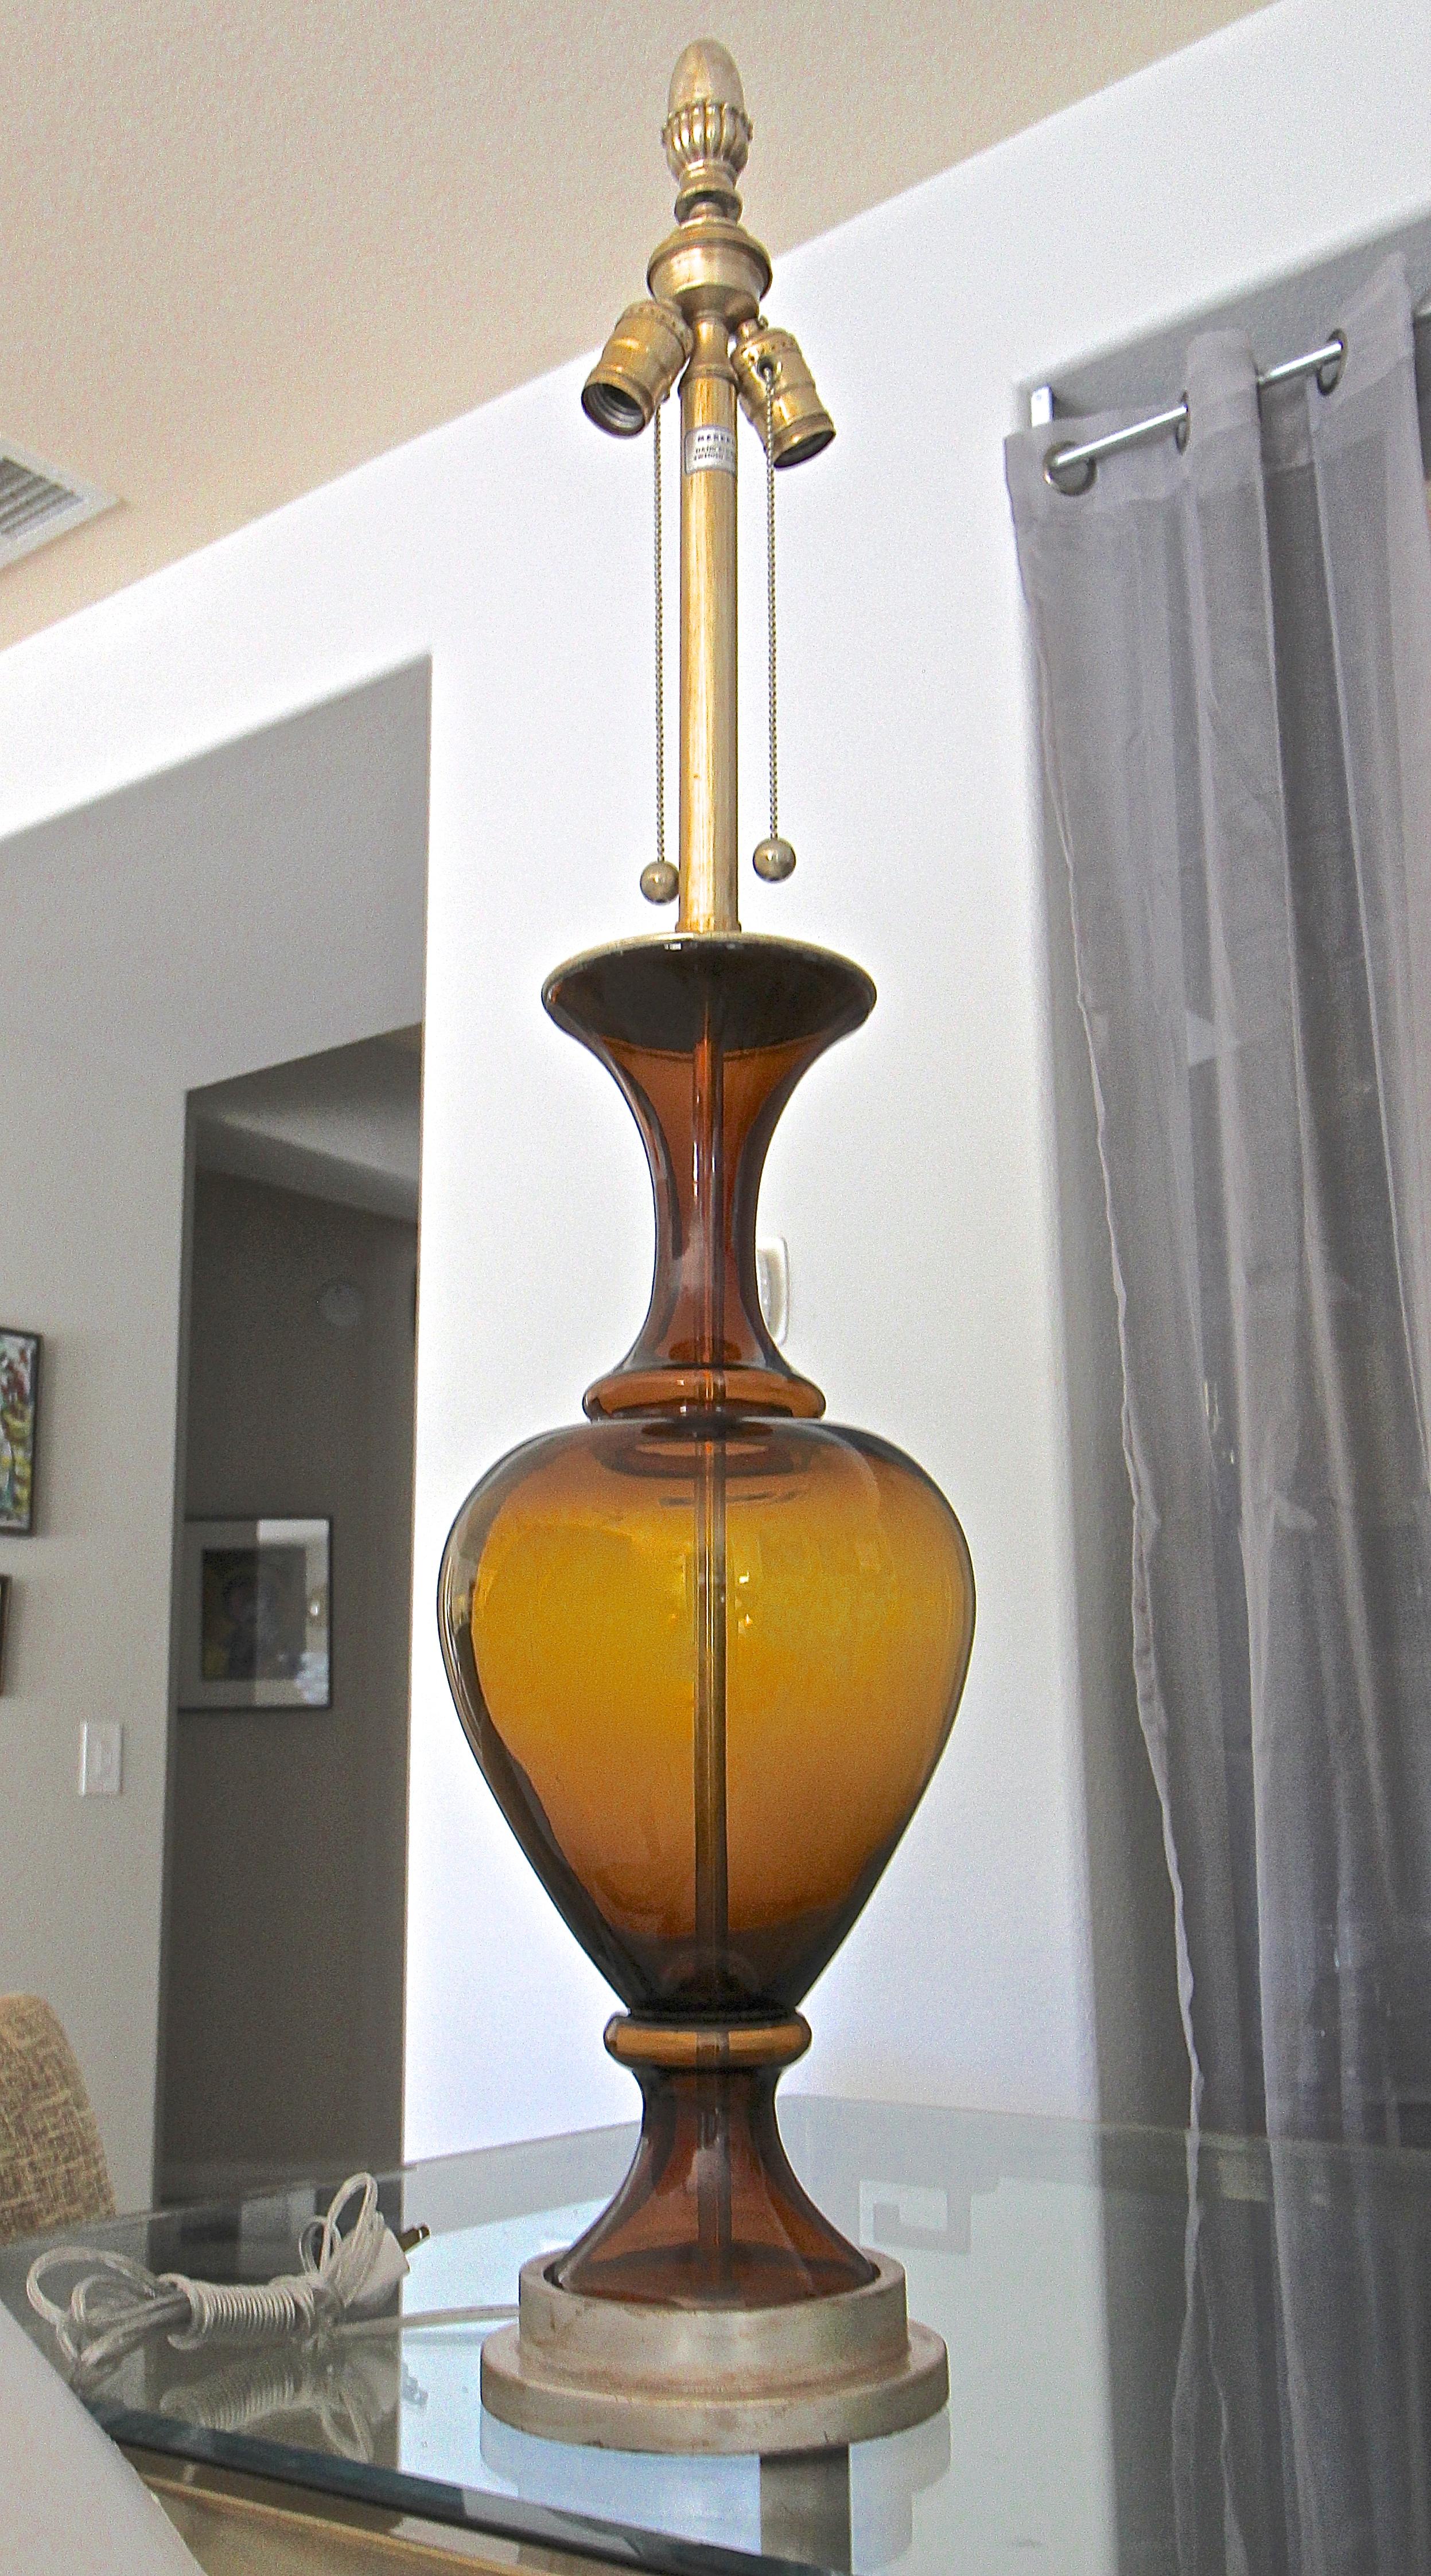 Large hand blown Marbro lamp with root beer colored blown glass body mounted silver giltwood base. Has double cluster antiqued chrome fittings and carved silver giltwood finial. Depending on light source glass color ranges from shades of amber to